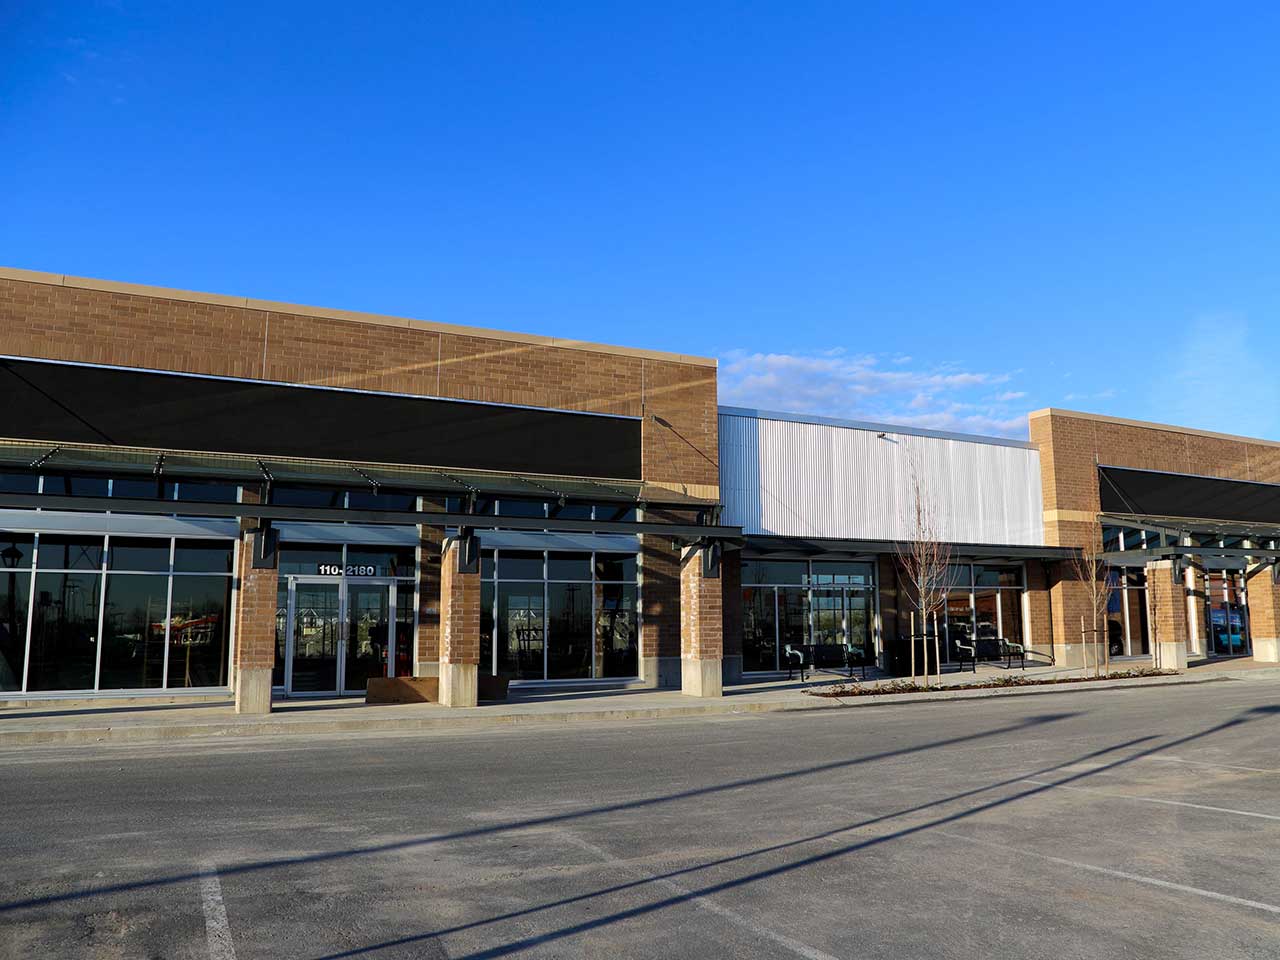 Commercial glass storefront in a new shopping center